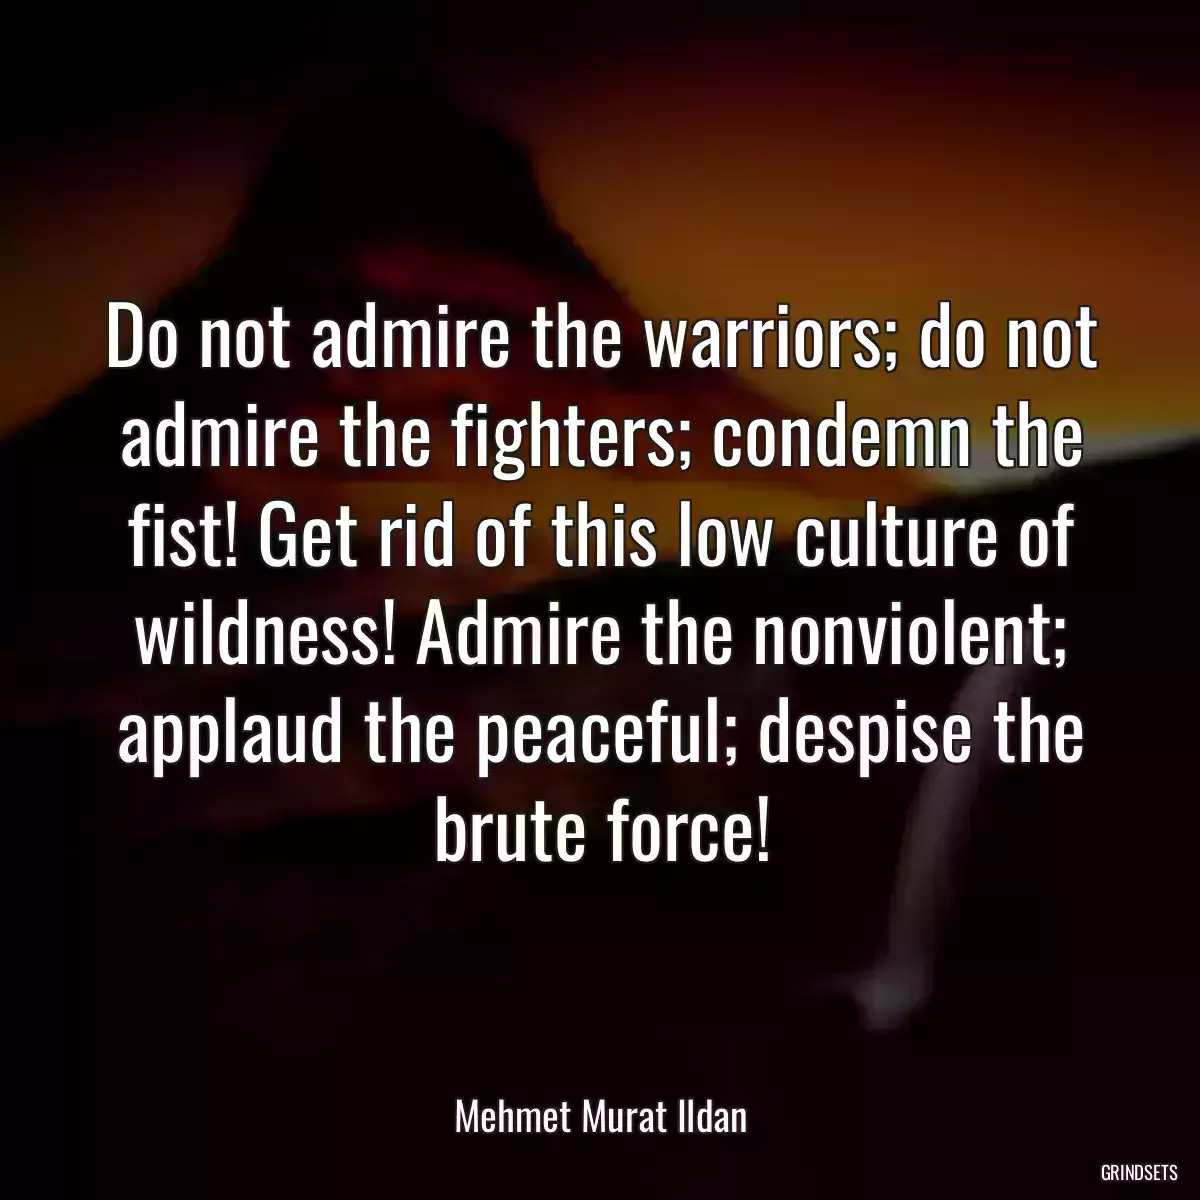 Do not admire the warriors; do not admire the fighters; condemn the fist! Get rid of this low culture of wildness! Admire the nonviolent; applaud the peaceful; despise the brute force!